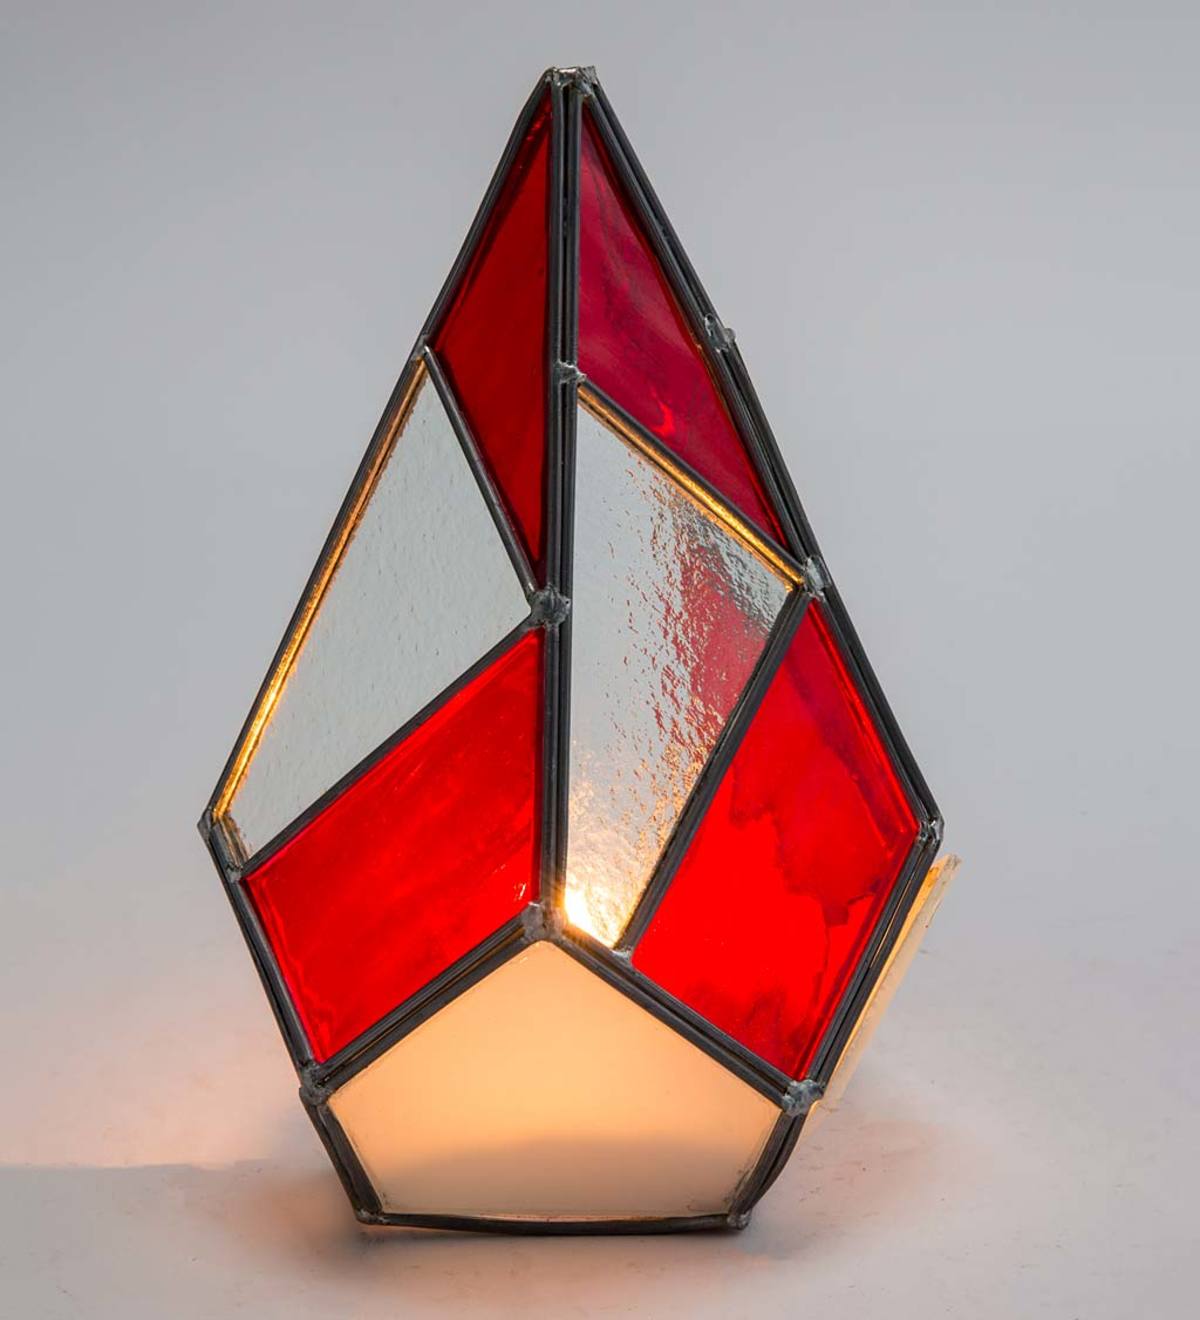 Red Stained Glass Modern Christmas Tree Candle Holder